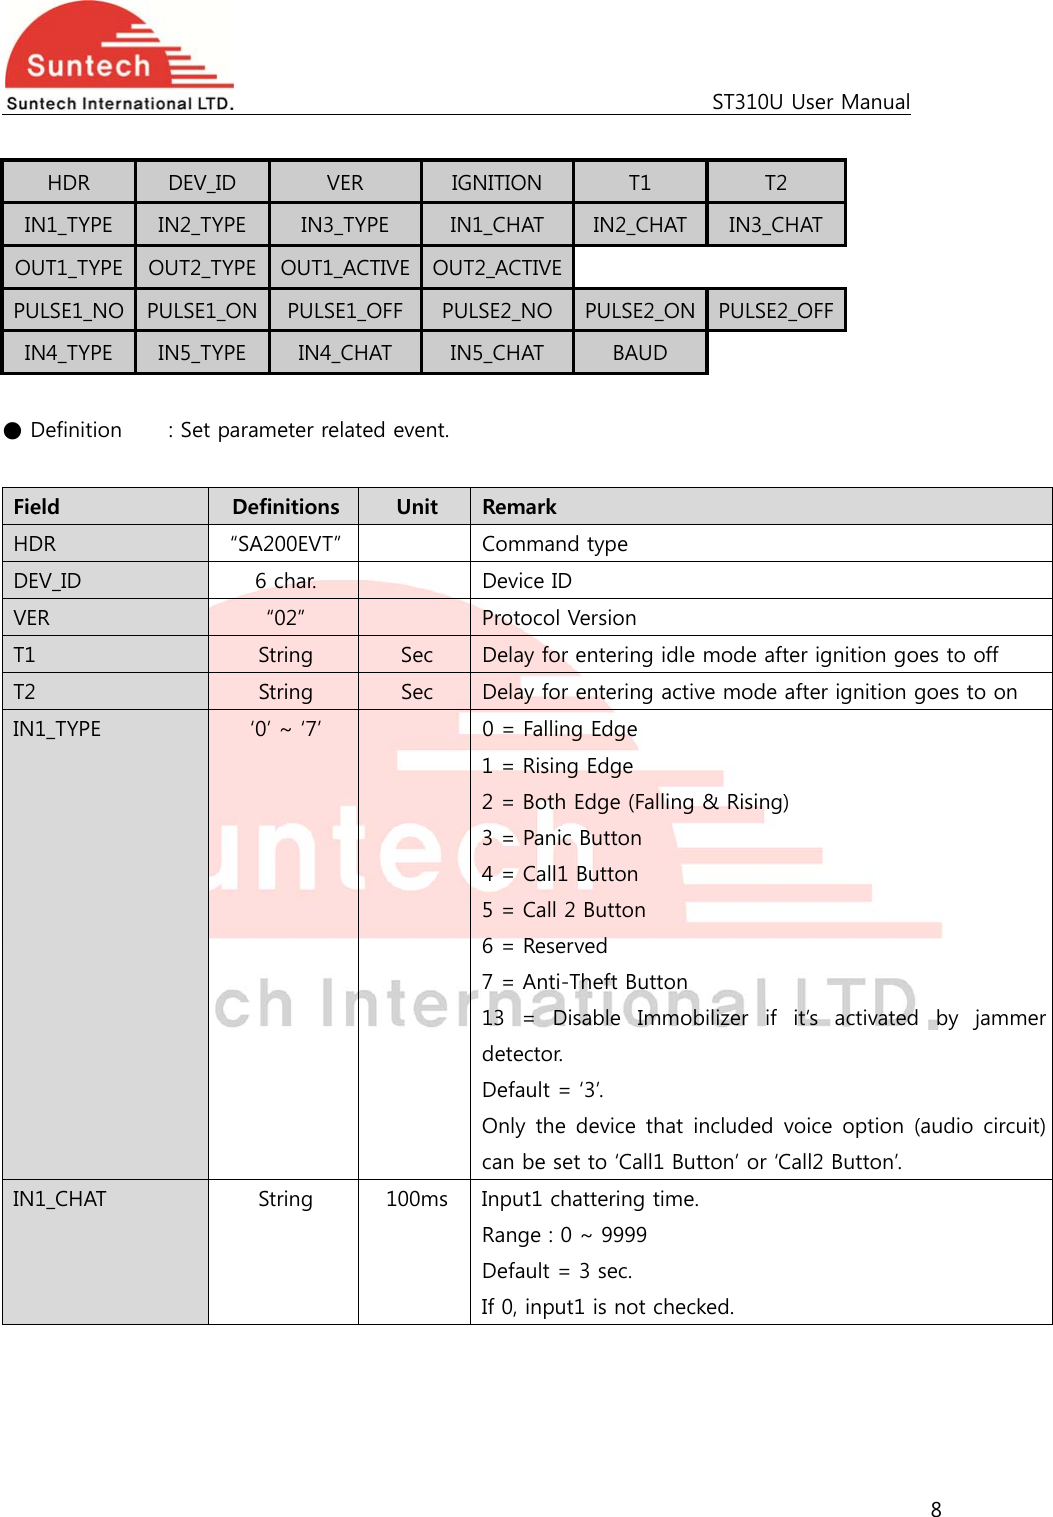                                                                                             ST310U User Manual 8   HDR  DEV_ID  VER  IGNITION  T1  T2 IN1_TYPE  IN2_TYPE  IN3_TYPE  IN1_CHAT  IN2_CHAT IN3_CHAT OUT1_TYPE  OUT2_TYPE  OUT1_ACTIVE OUT2_ACTIVEPULSE1_NO  PULSE1_ON  PULSE1_OFF PULSE2_NO  PULSE2_ON PULSE2_OFF IN4_TYPE  IN5_TYPE  IN4_CHAT  IN5_CHAT  BAUD  ● Definition   : Set parameter related event.  Field  Definitions  Unit  Remark HDR  “SA200EVT”    Command type DEV_ID  6 char.    Device ID VER  “02”    Protocol Version T1  String  Sec  Delay for entering idle mode after ignition goes to off T2  String  Sec  Delay for entering active mode after ignition goes to on IN1_TYPE  ‘0’ ~ ‘7’    0 = Falling Edge 1 = Rising Edge 2 = Both Edge (Falling &amp; Rising) 3 = Panic Button 4 = Call1 Button 5 = Call 2 Button 6 = Reserved 7 = Anti-Theft Button 13  =  Disable  Immobilizer  if  it’s  activated  by  jammer detector. Default = ‘3’. Only  the  device  that  included  voice  option  (audio circuit) can be set to ‘Call1 Button’ or ‘Call2 Button’. IN1_CHAT  String  100ms  Input1 chattering time.   Range : 0 ~ 9999 Default = 3 sec. If 0, input1 is not checked. 